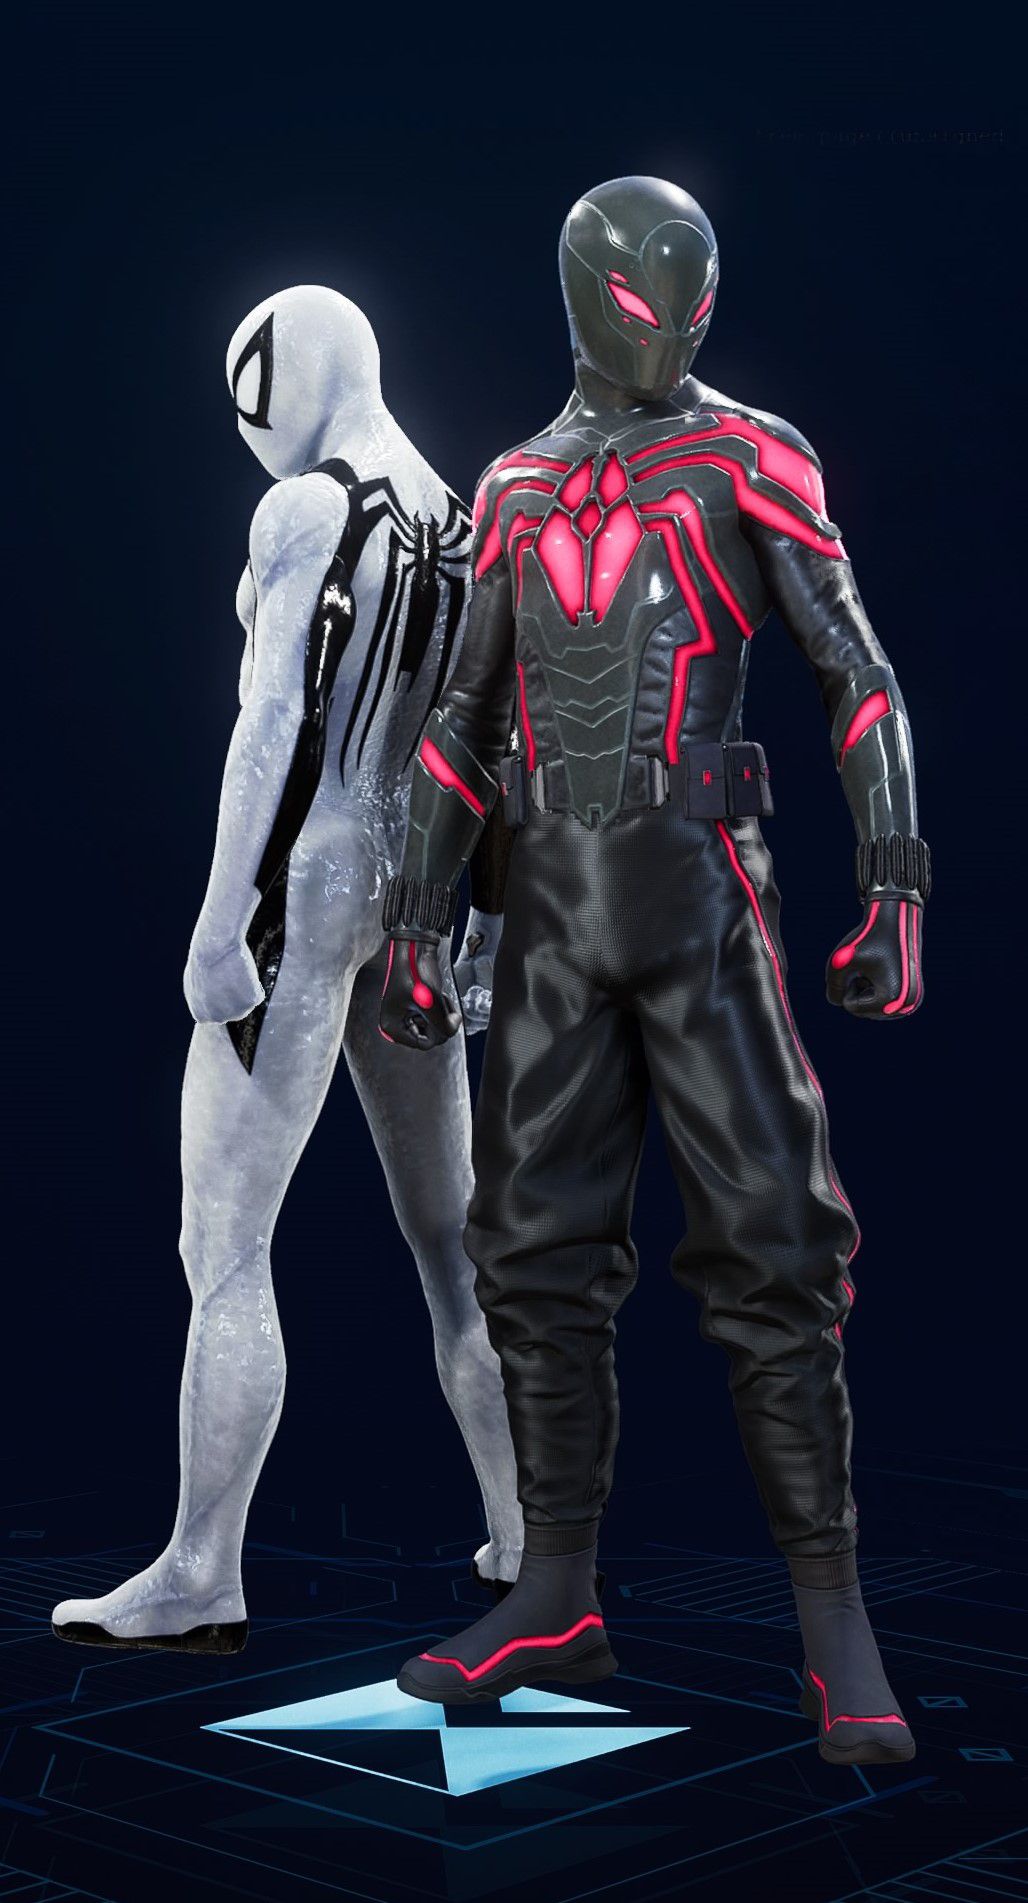 Miles Morales stands in his Brooklyn 2099 Suit in the suit selection screen of Spider-Man 2.